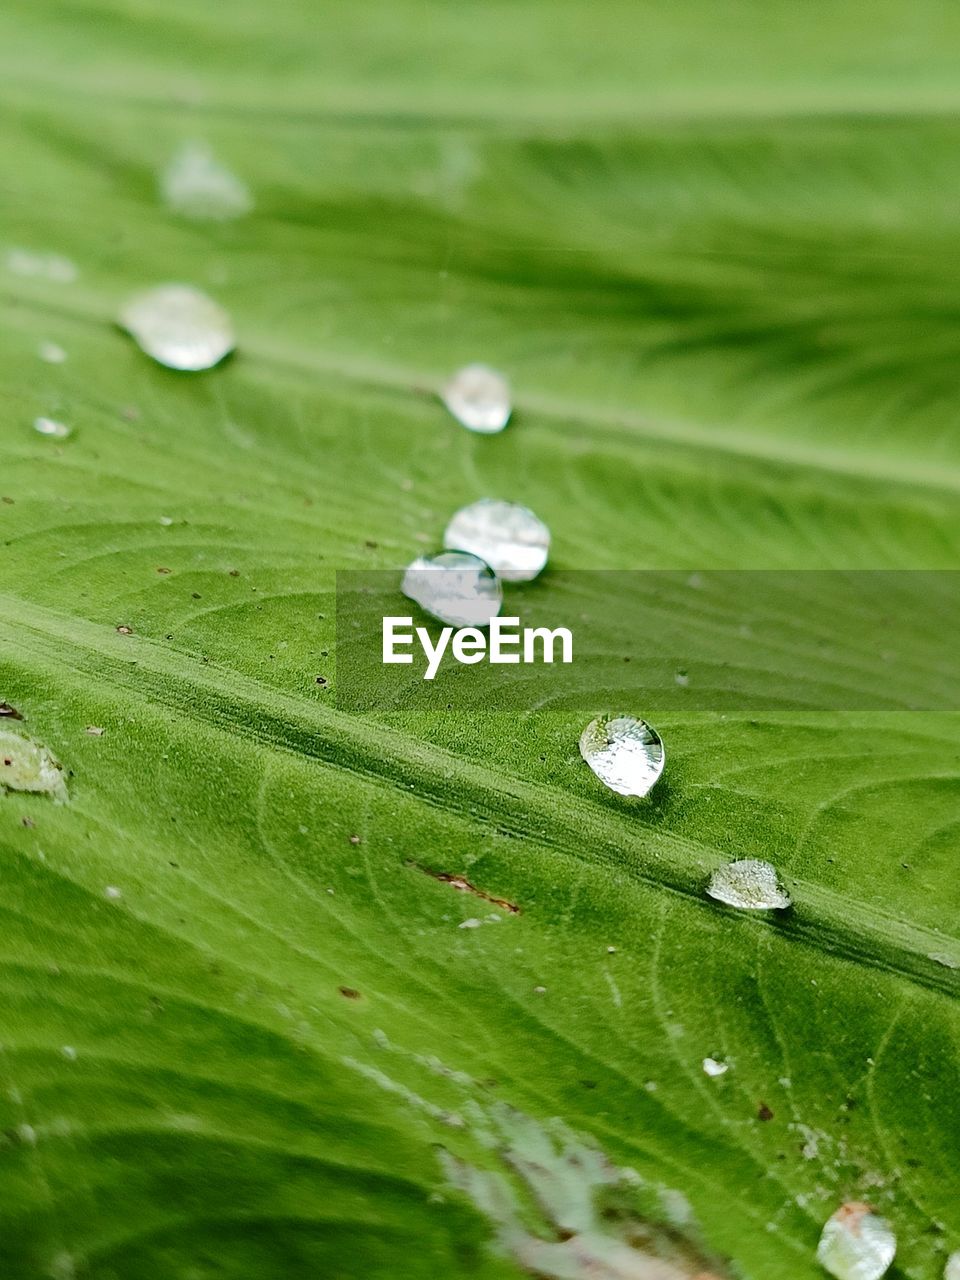 leaf, plant part, drop, water, wet, green, nature, plant, grass, dew, moisture, beauty in nature, close-up, freshness, rain, macro photography, no people, growth, environment, fragility, plant stem, backgrounds, purity, outdoors, selective focus, macro, flower, petal, tranquility, day, full frame, raindrop, leaf vein, lawn